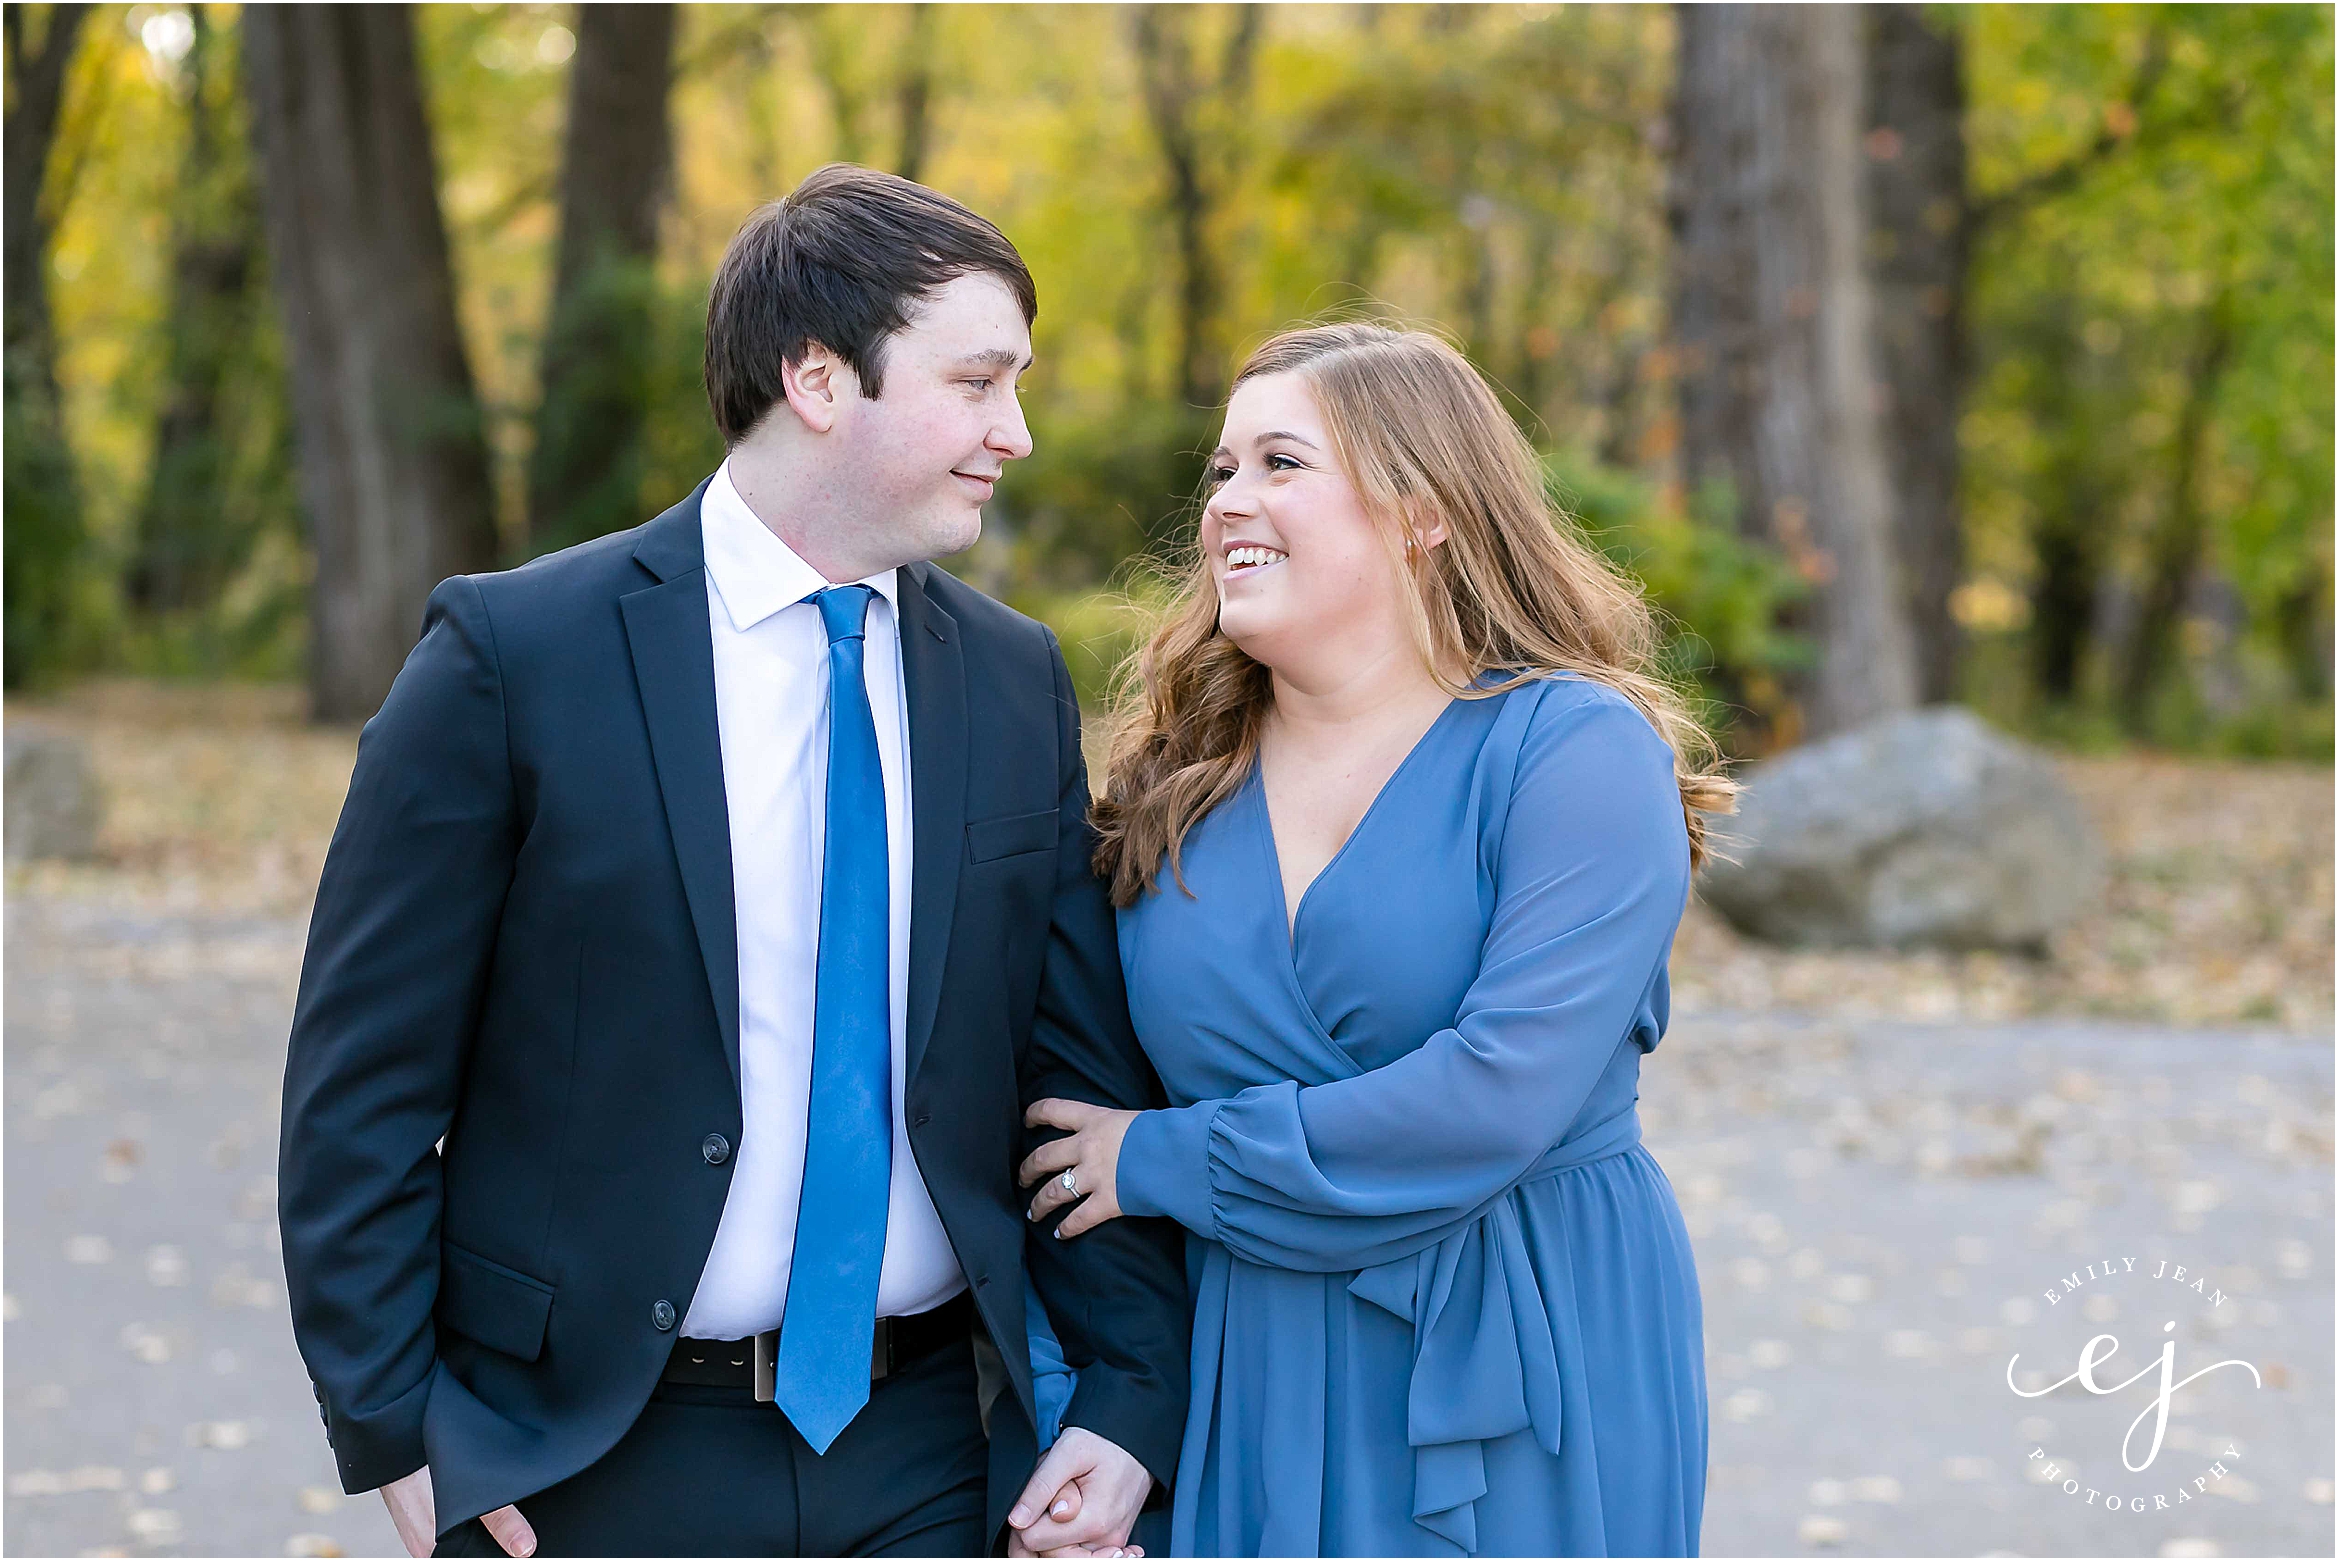 engagement session suit and tie long blue dress walking in park